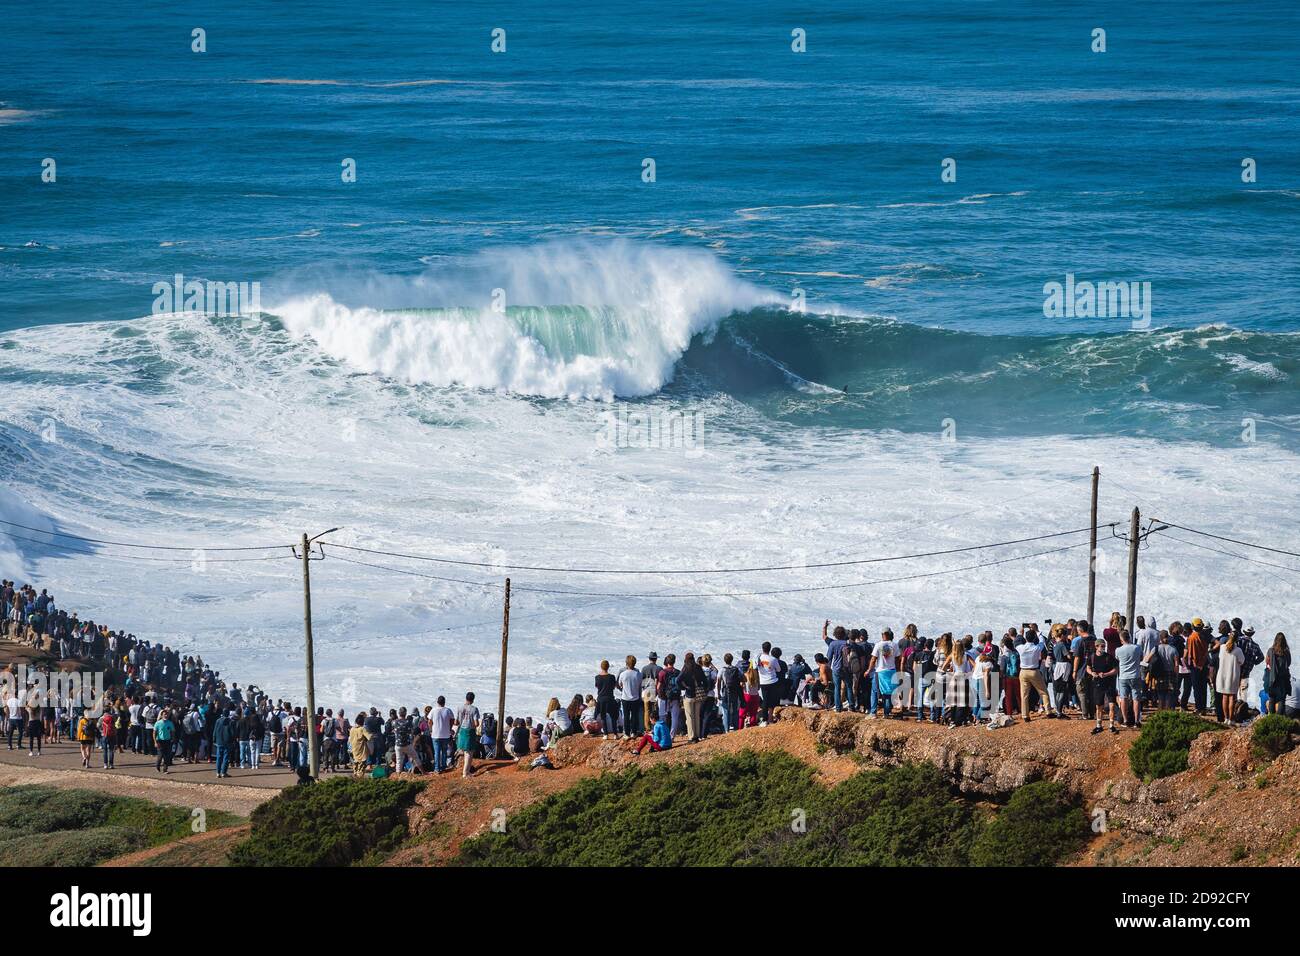 People watching big wave surfer riding giant wave at Praia do Norte beach in Nazare, Portugal. Stock Photo